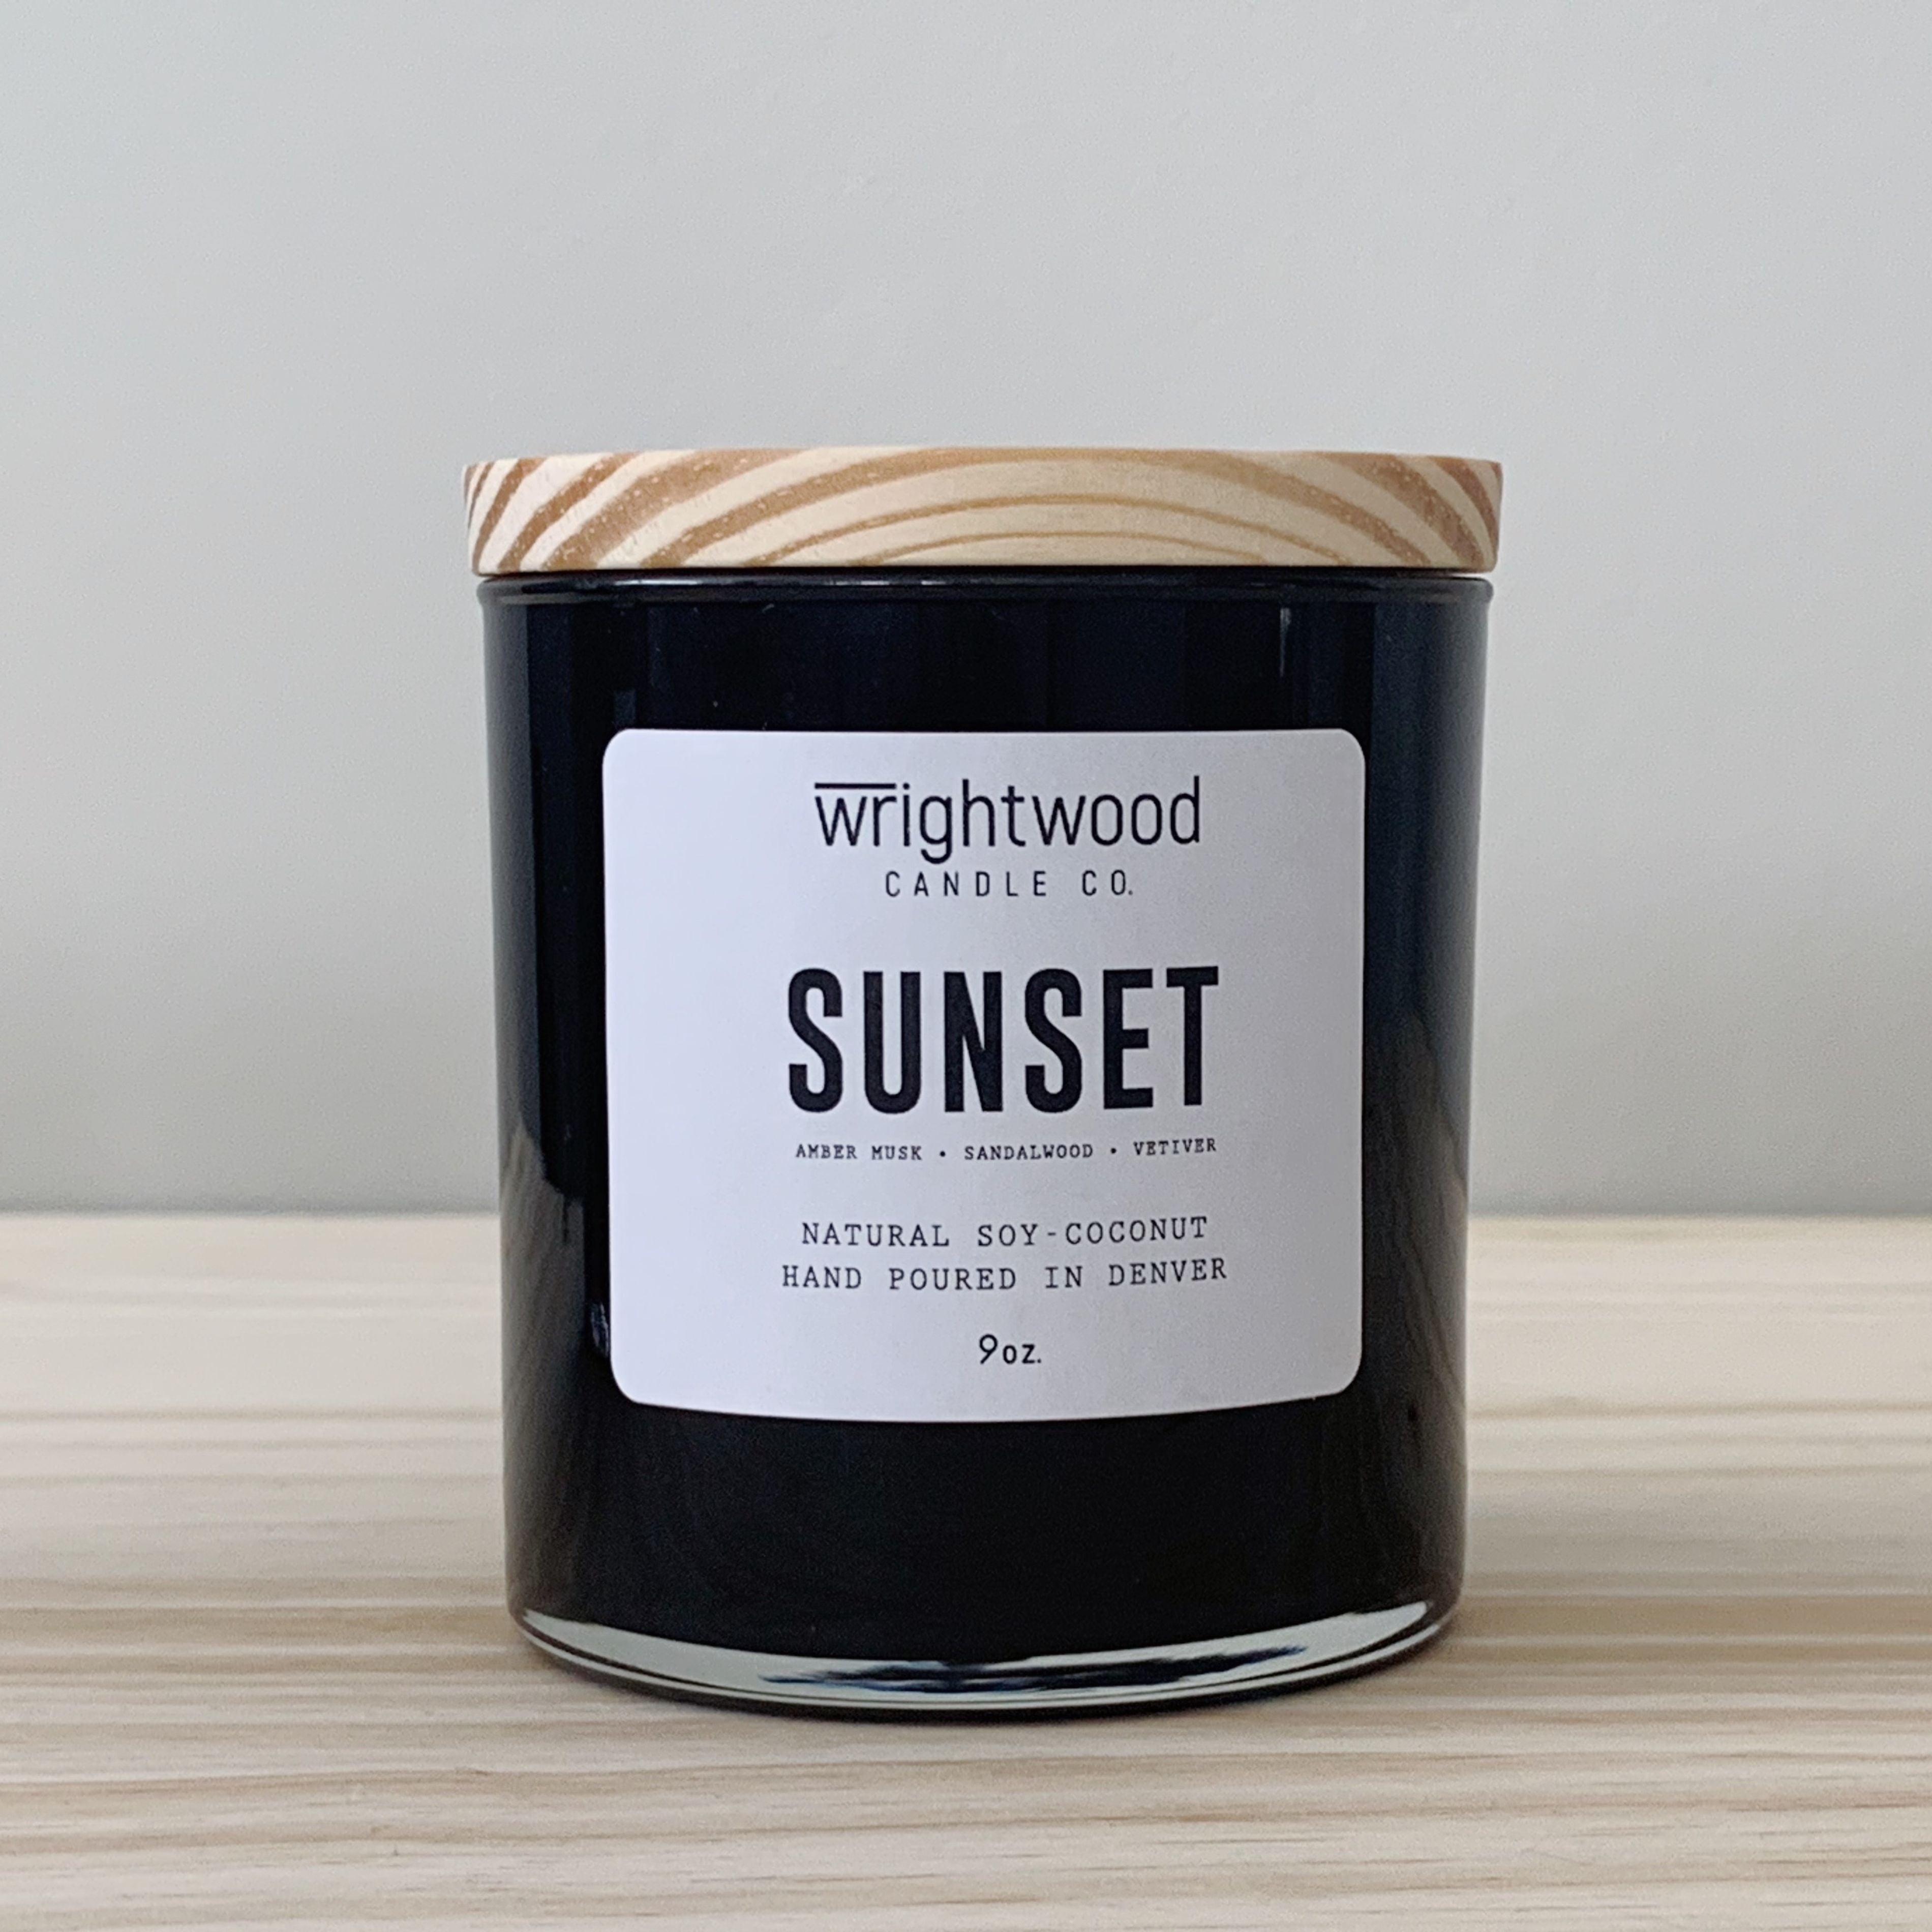 One black candle jar is sitting on top of a wood table with a neutral colored background. The candle has a wood lid and white label. The label has the scent name and company name visible. 